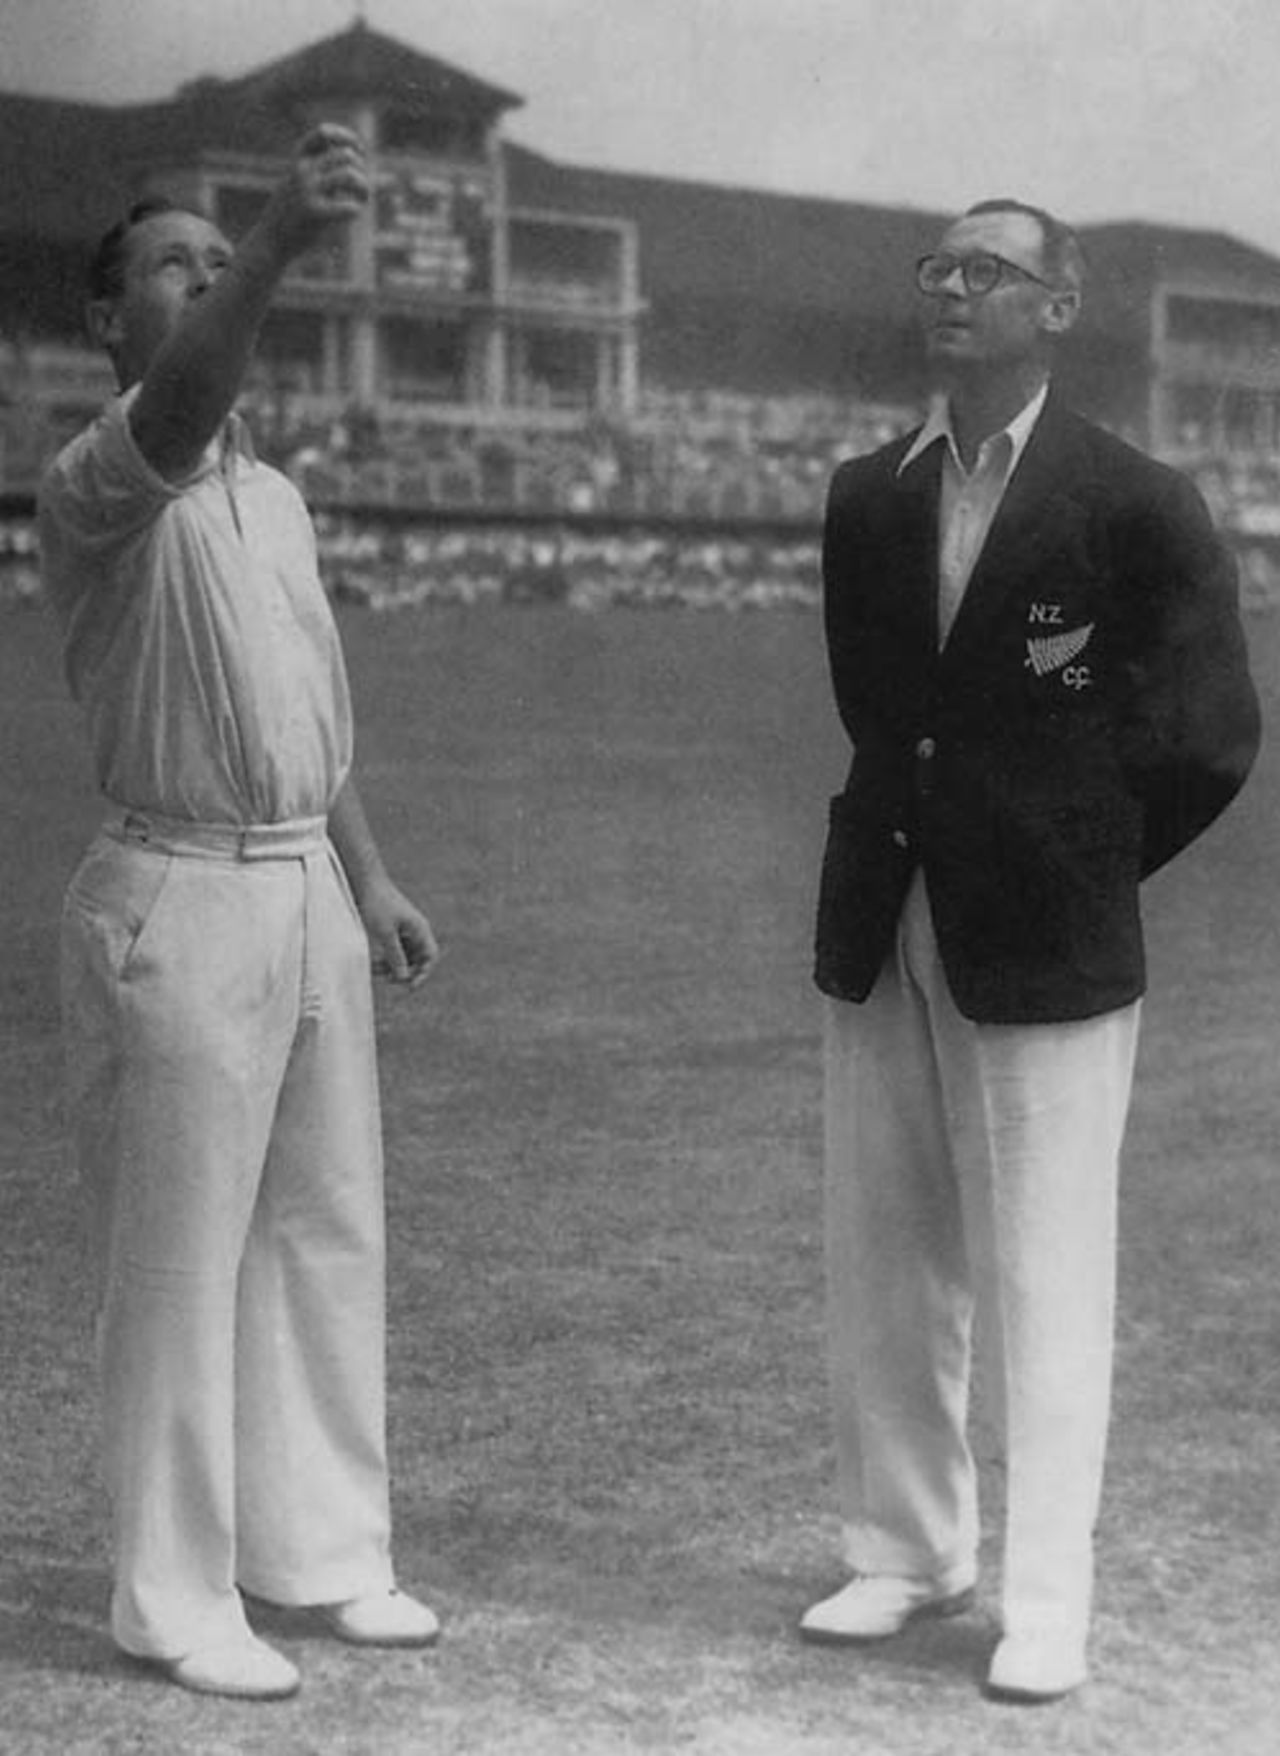 George Mann and Walter Hadlee toss, England v New Zealand, Lord's, June 1949